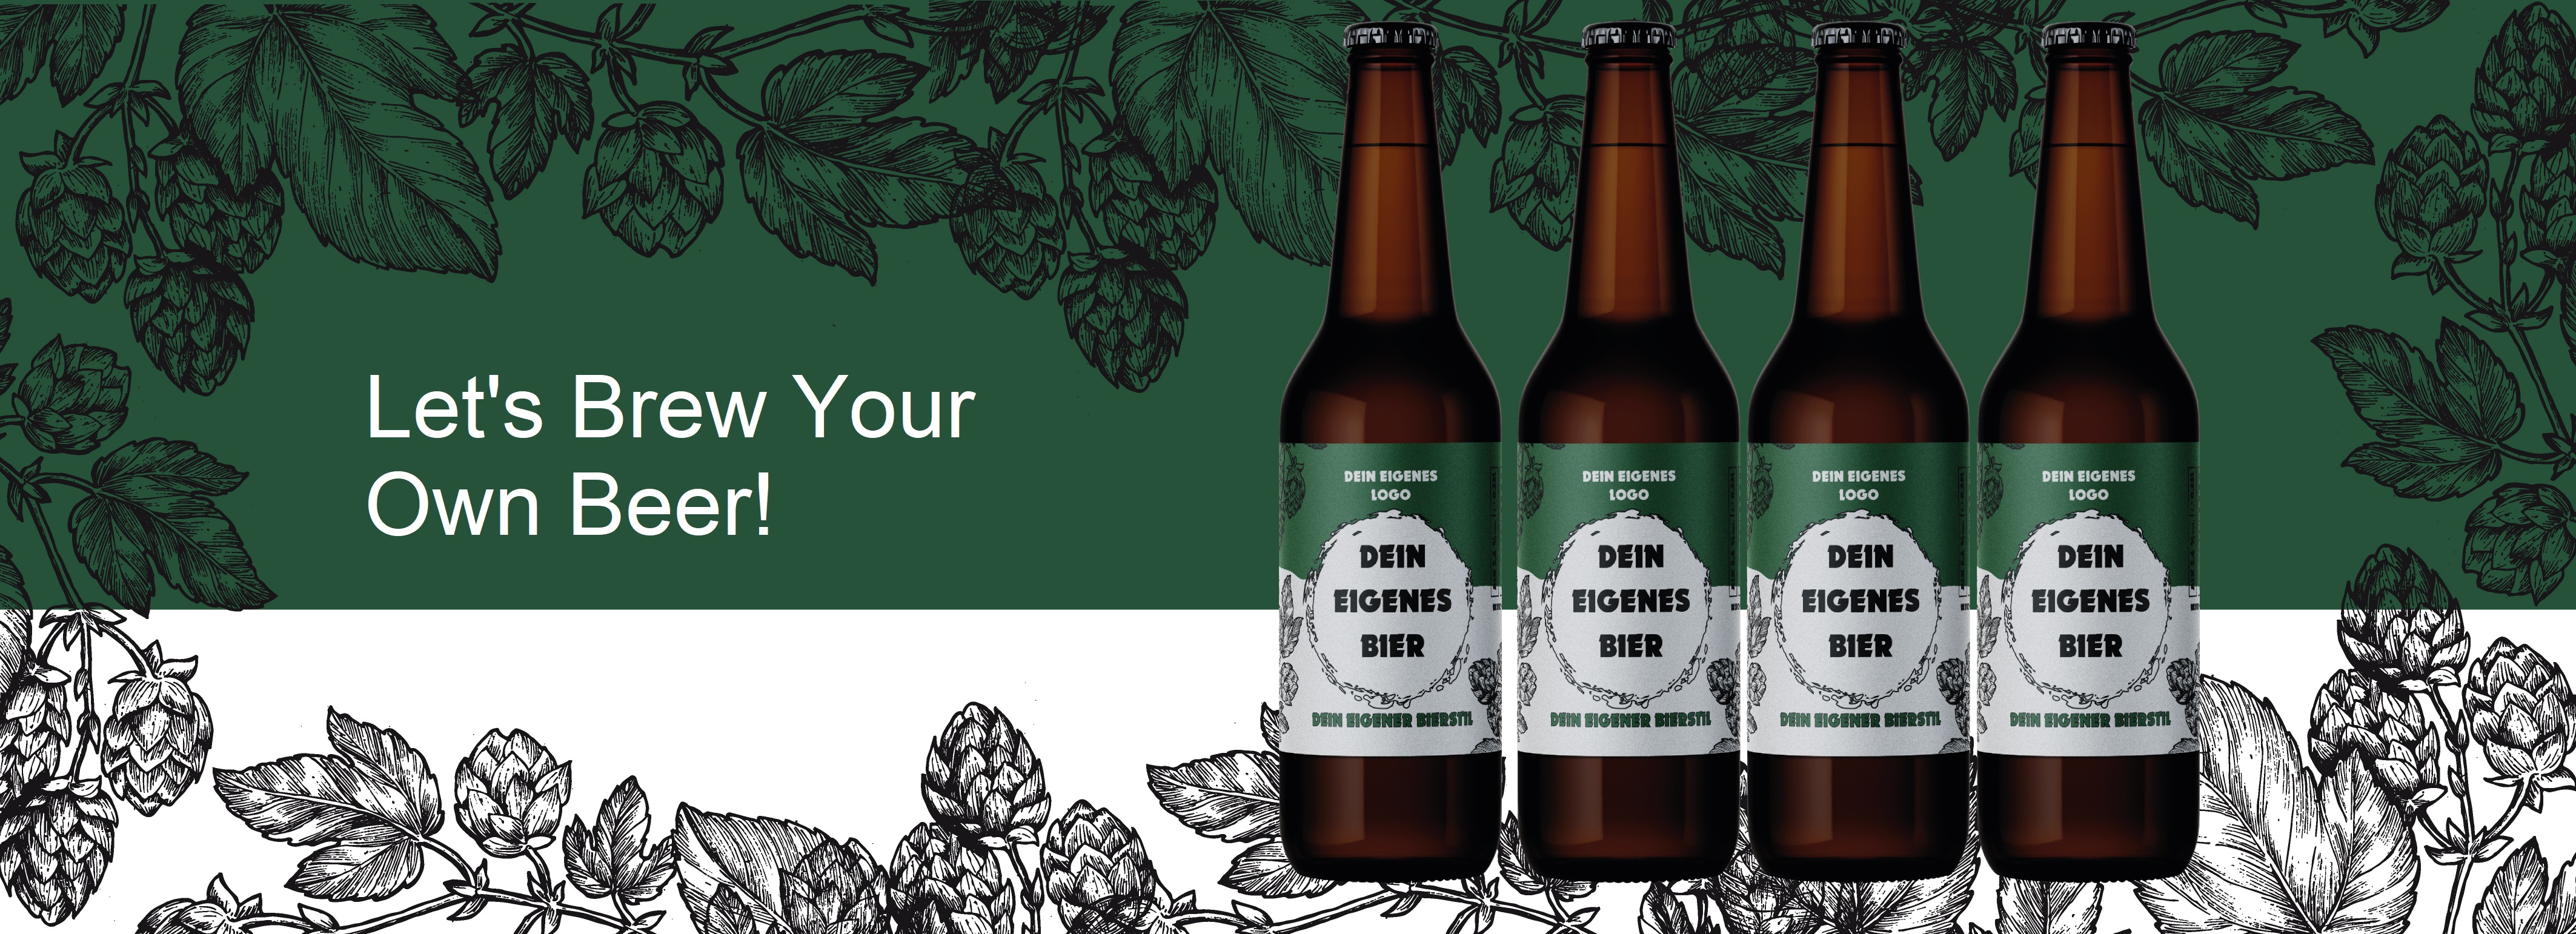 Introducing Your Own Craft Beer Brand Experience!